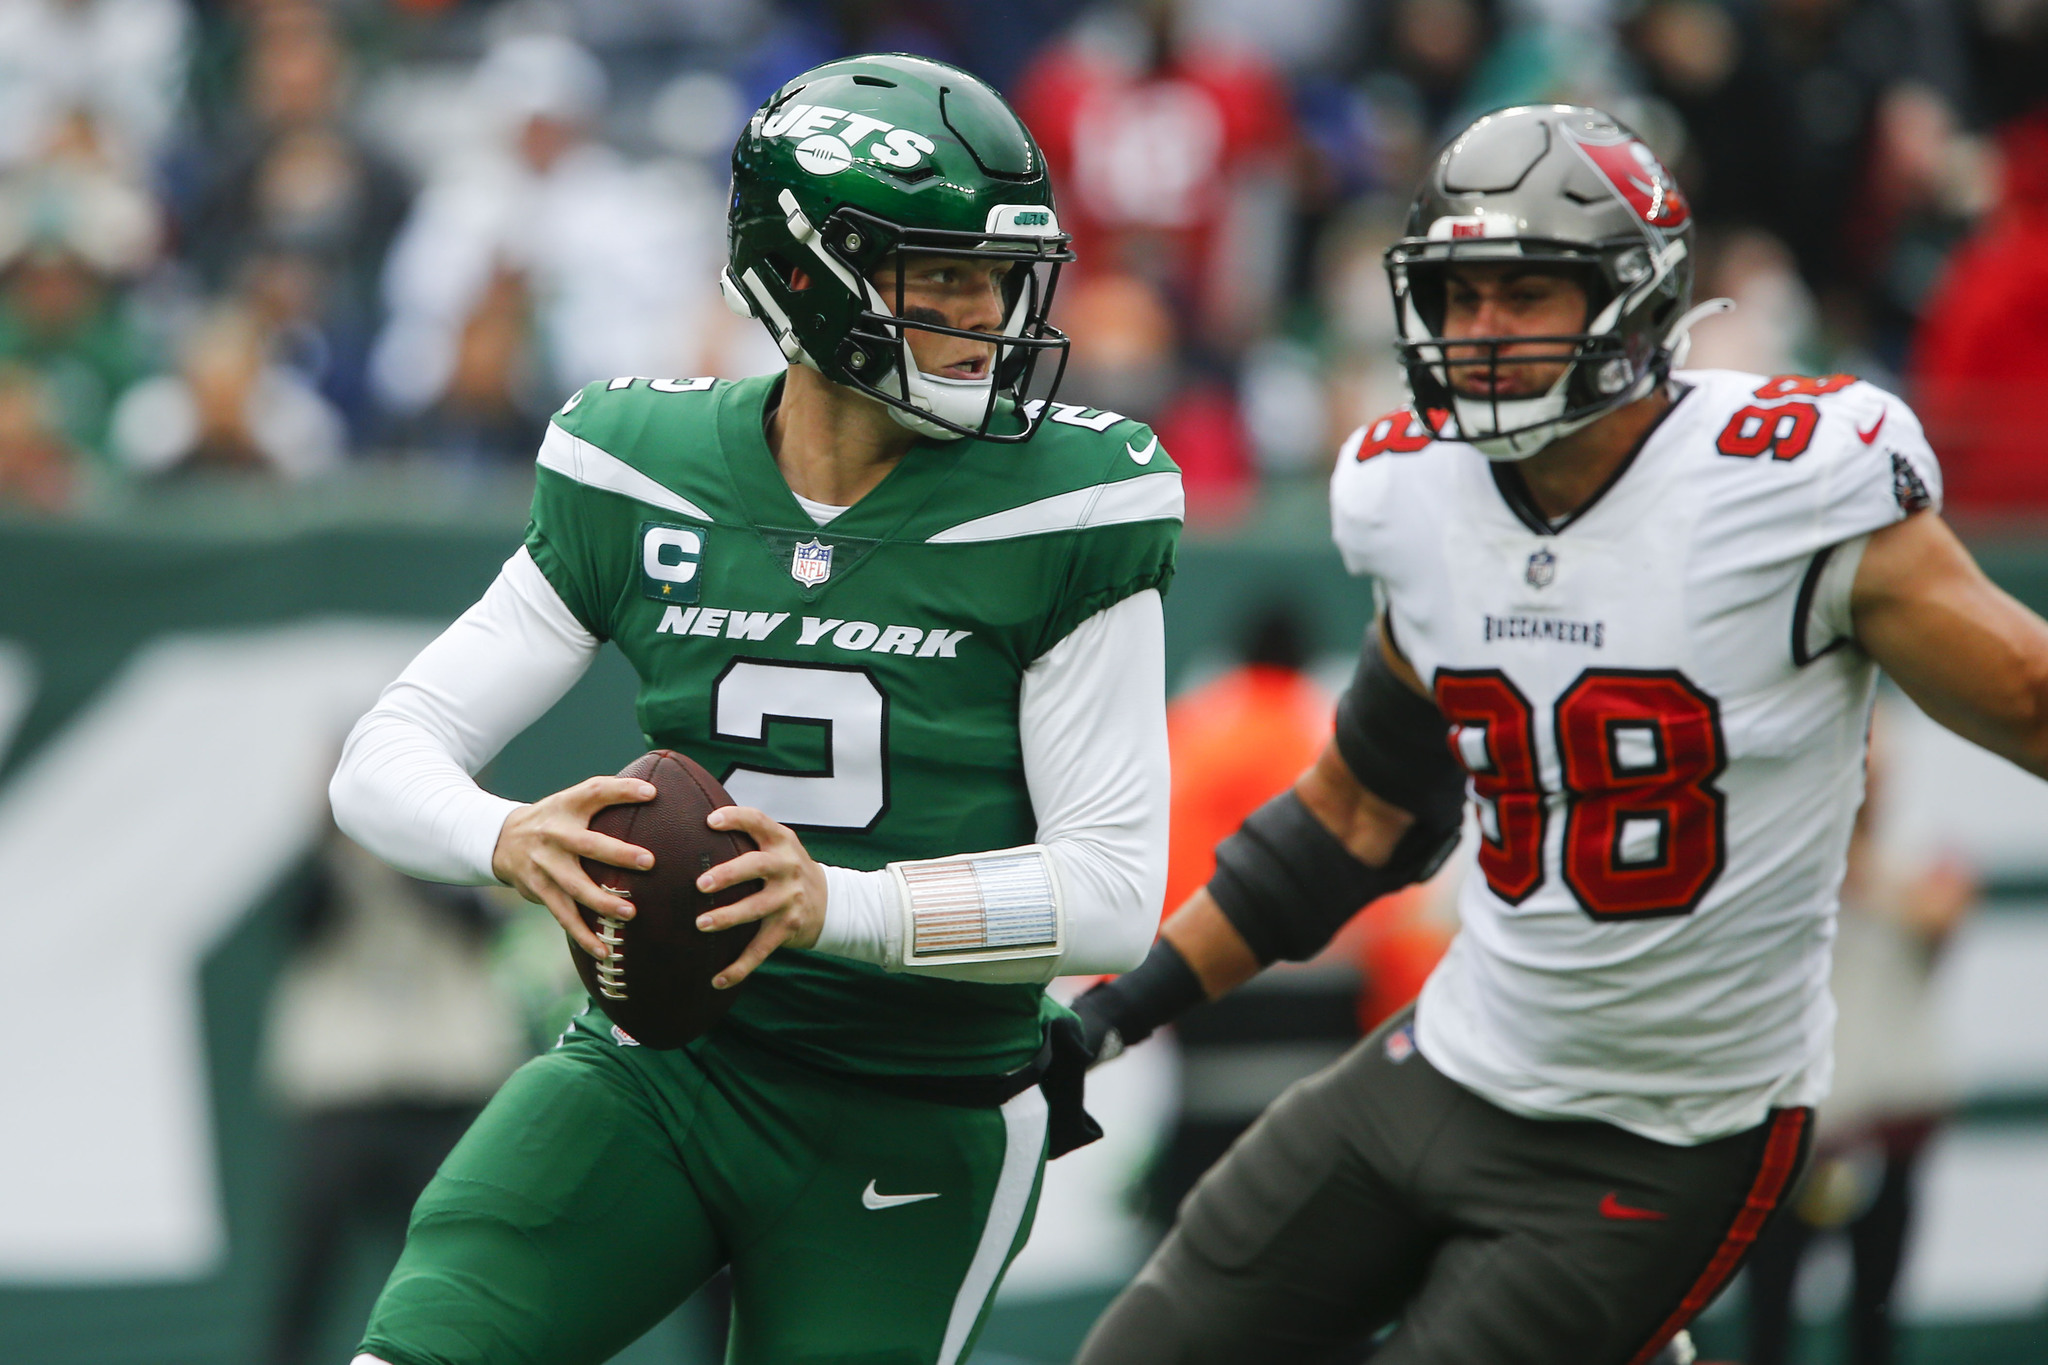 New York Jets Zach Wilson looks to throw during the first half of an NFL football game against the Tampa Bay Buccaneers.